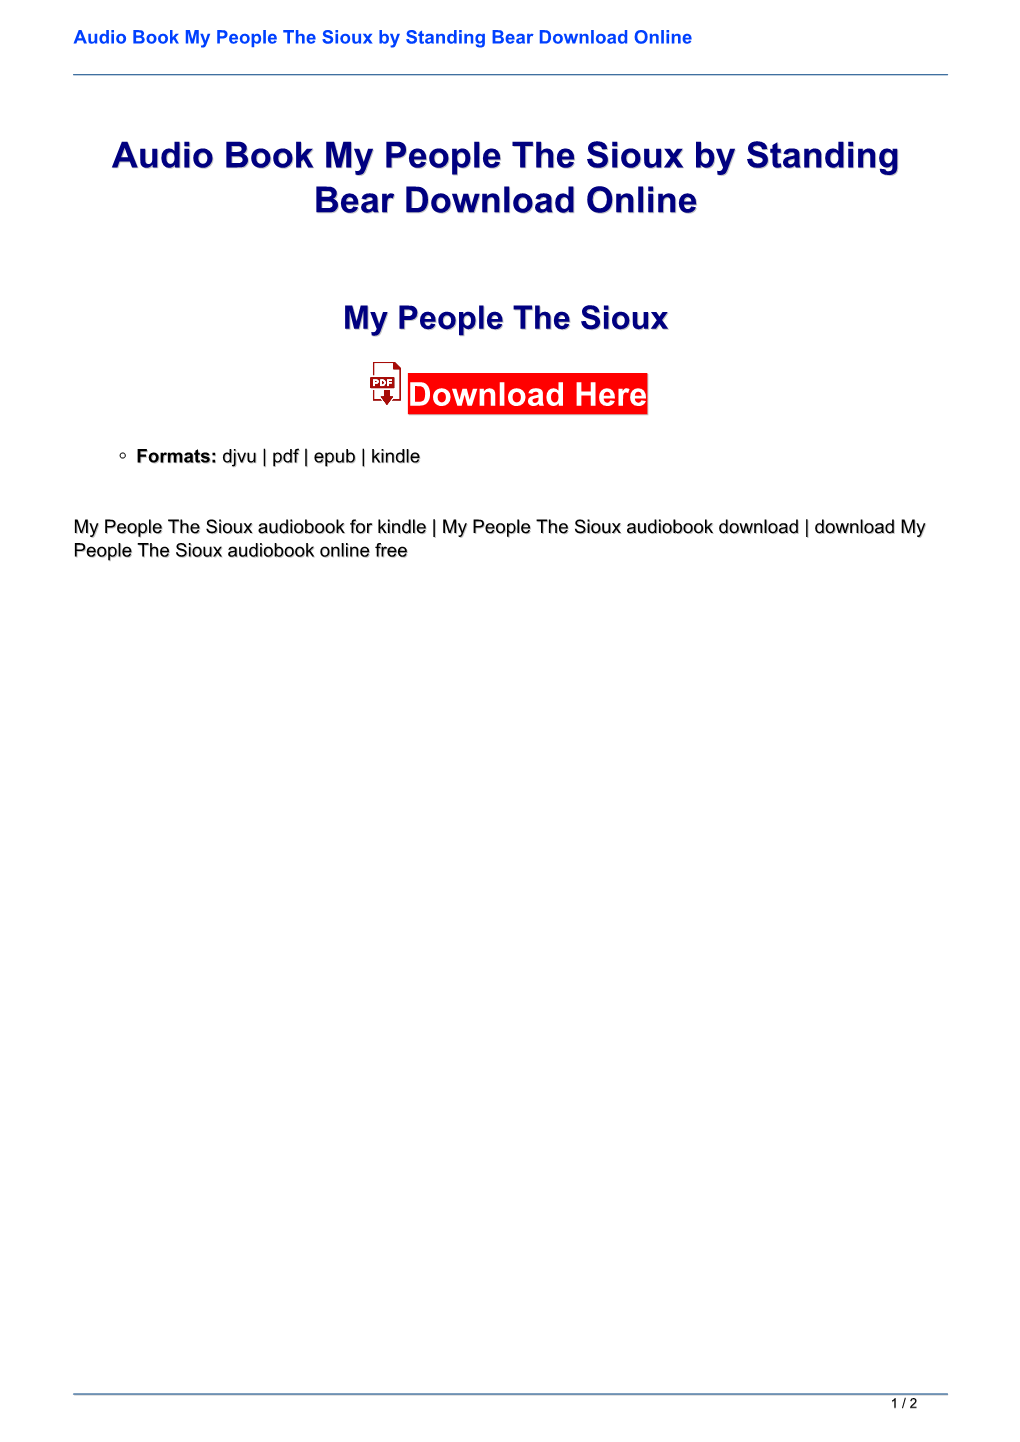 Audio Book My People the Sioux by Standing Bear Download Online Qbfzrwpd